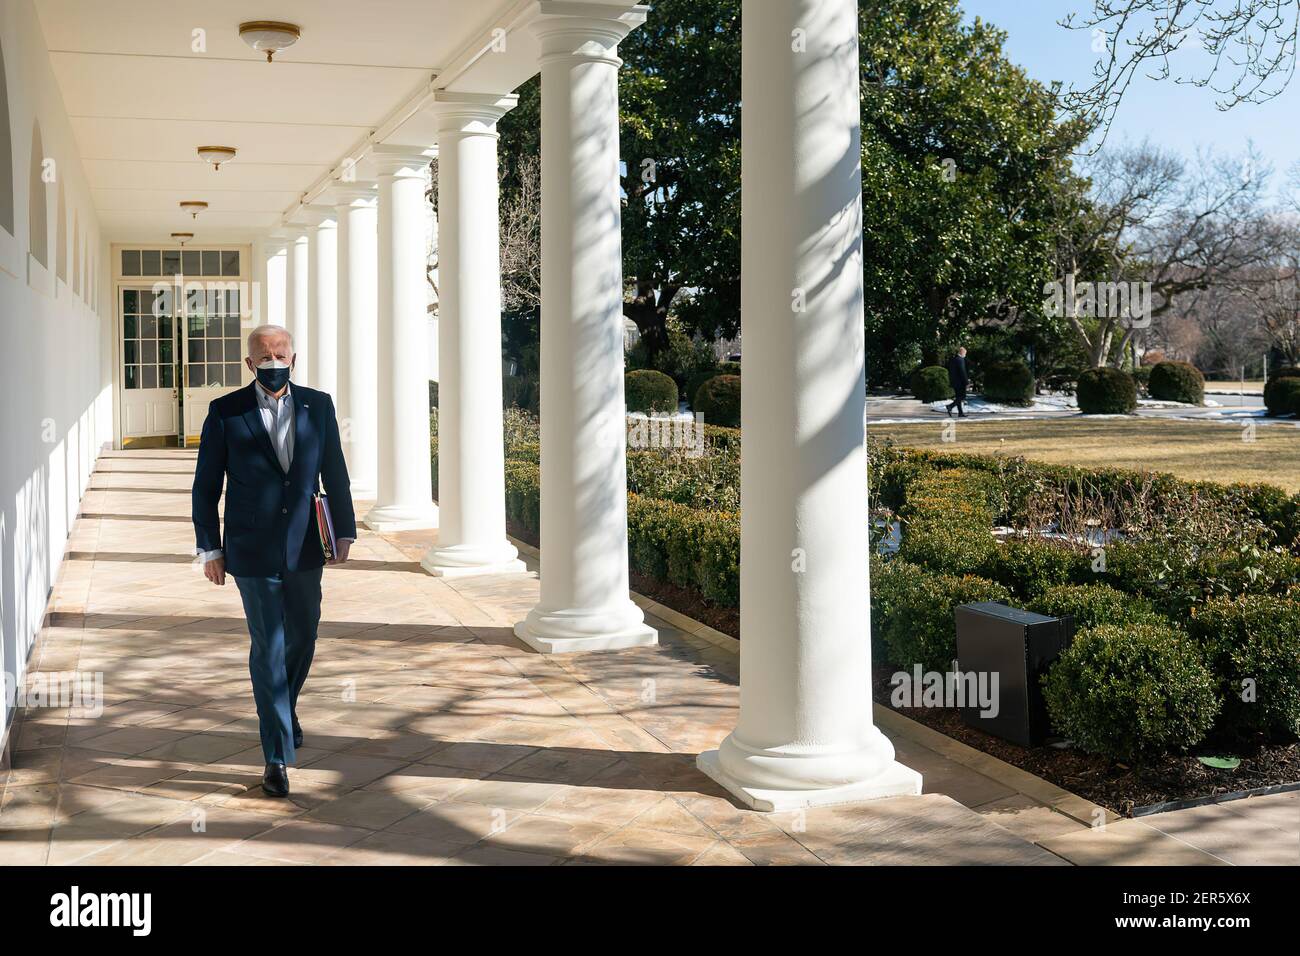 President Joe Biden arrives to the Oval Office Saturday, Feb. 20, 2021, along the West Wing Colonnade of the White House. (Official White House Photo by Adam Schultz) Stock Photo